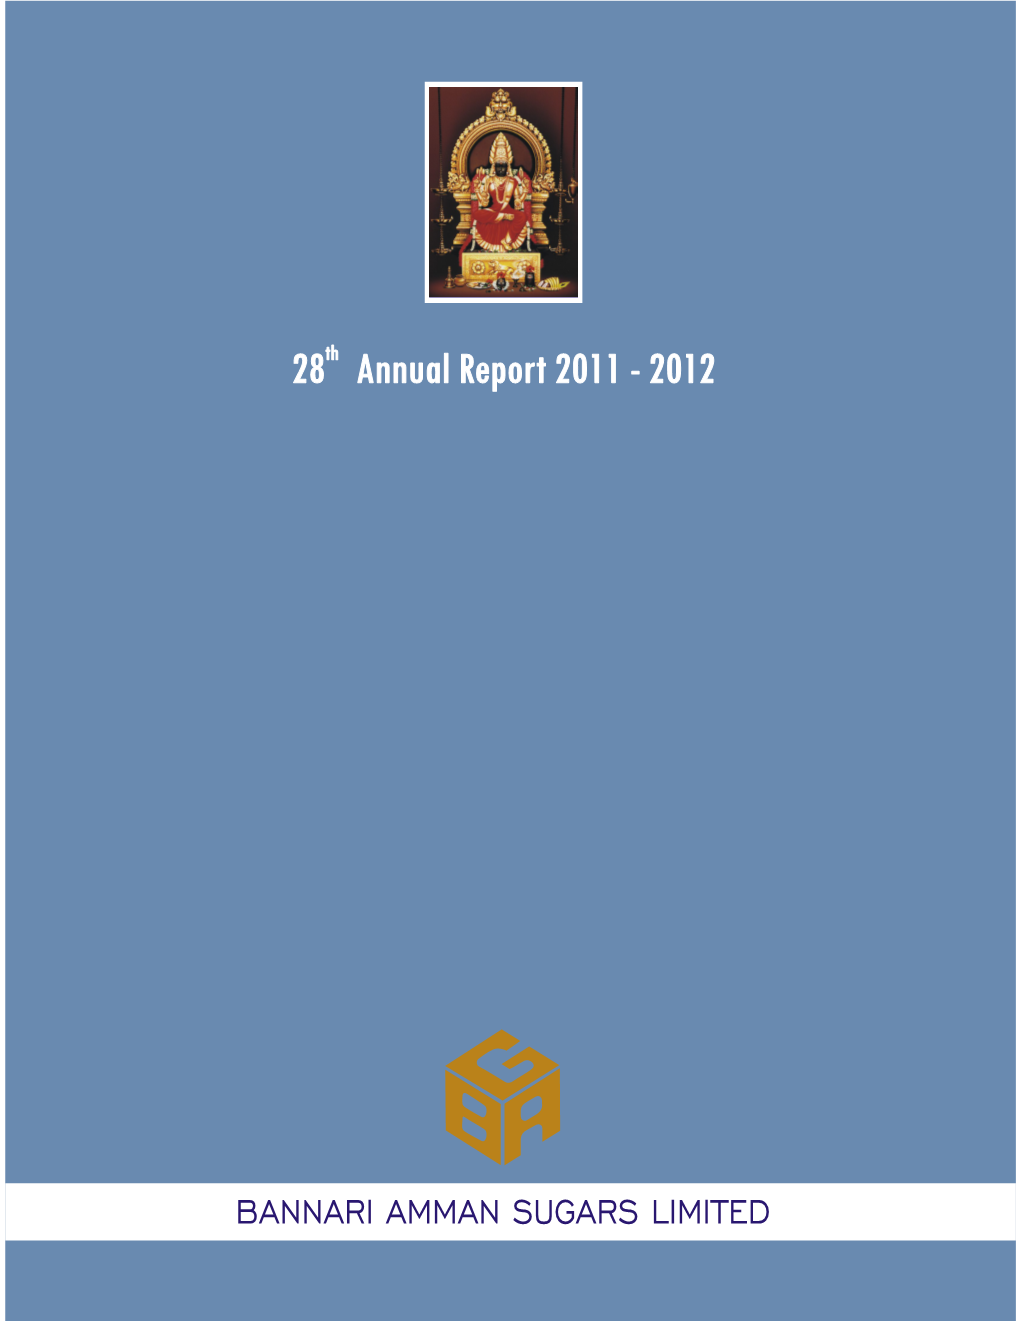 Annual Report Final Touch 1 8 2012.Cdr